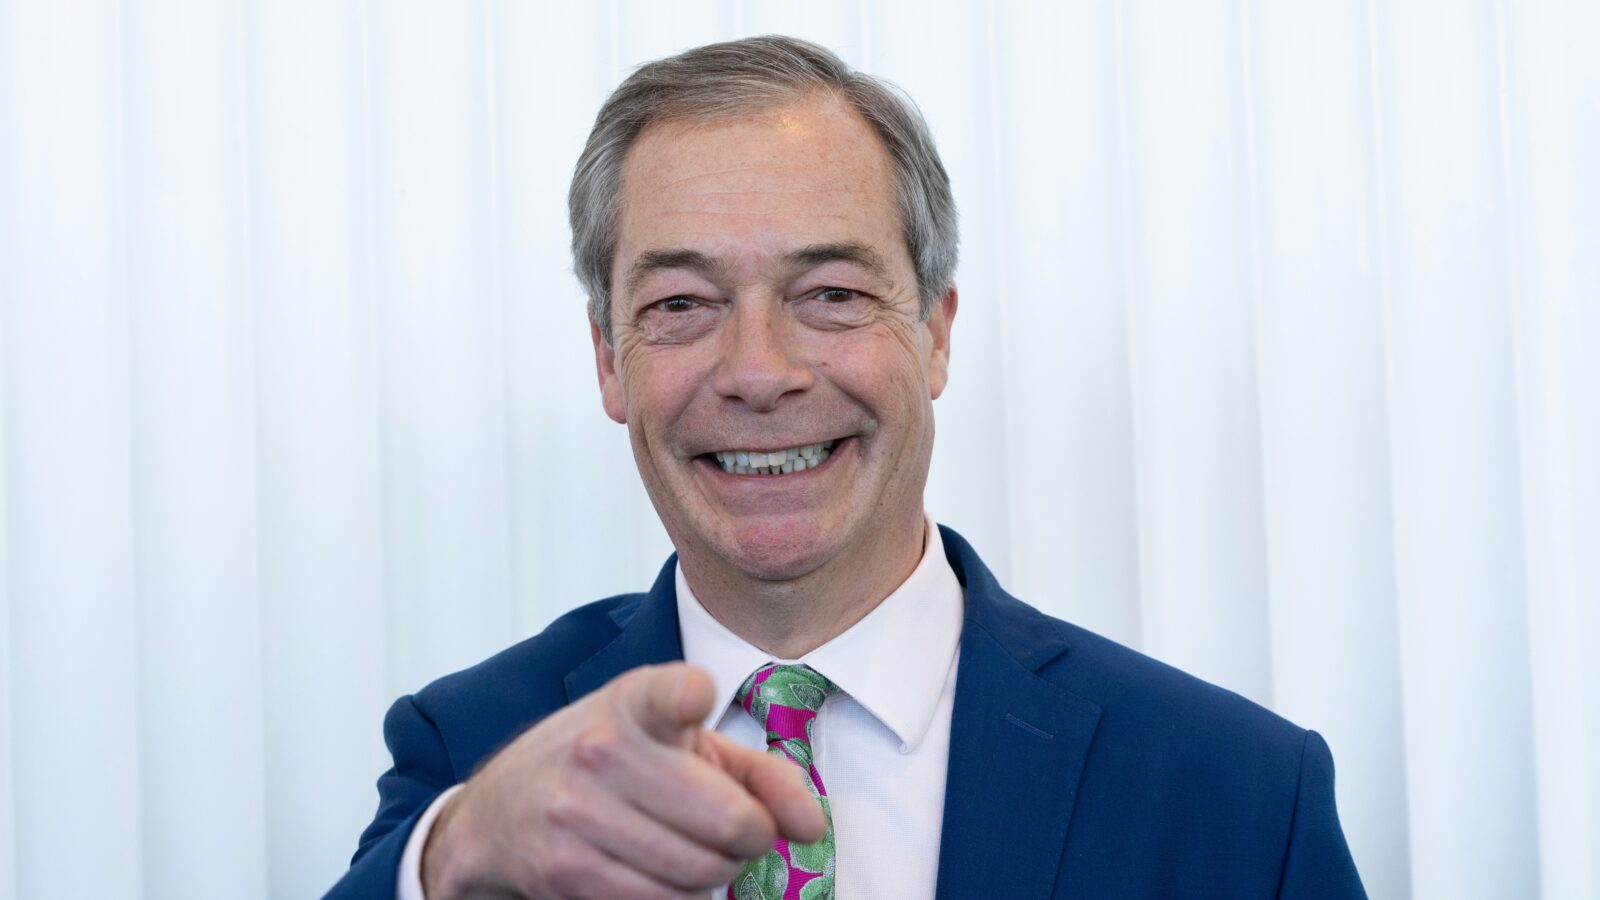 Is Farage on his way to becoming the next Tory leader?